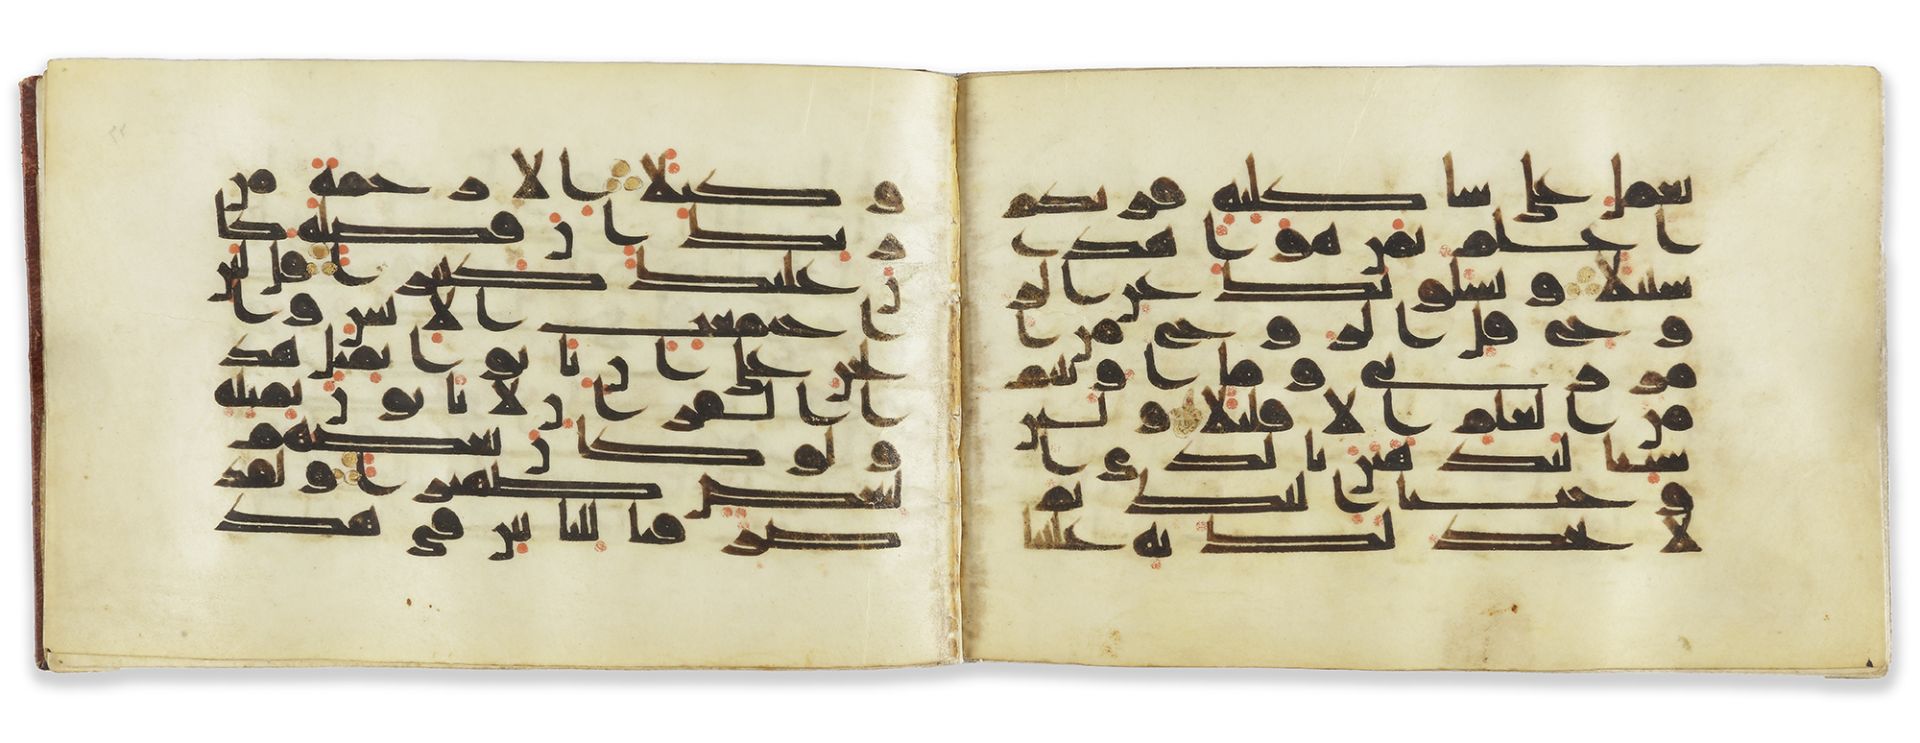 AN EASTERN KUFIC SECTION ON VELLUM, NORTH AFRICA OR NEAR EAST, 9TH CENTURY - Image 5 of 9